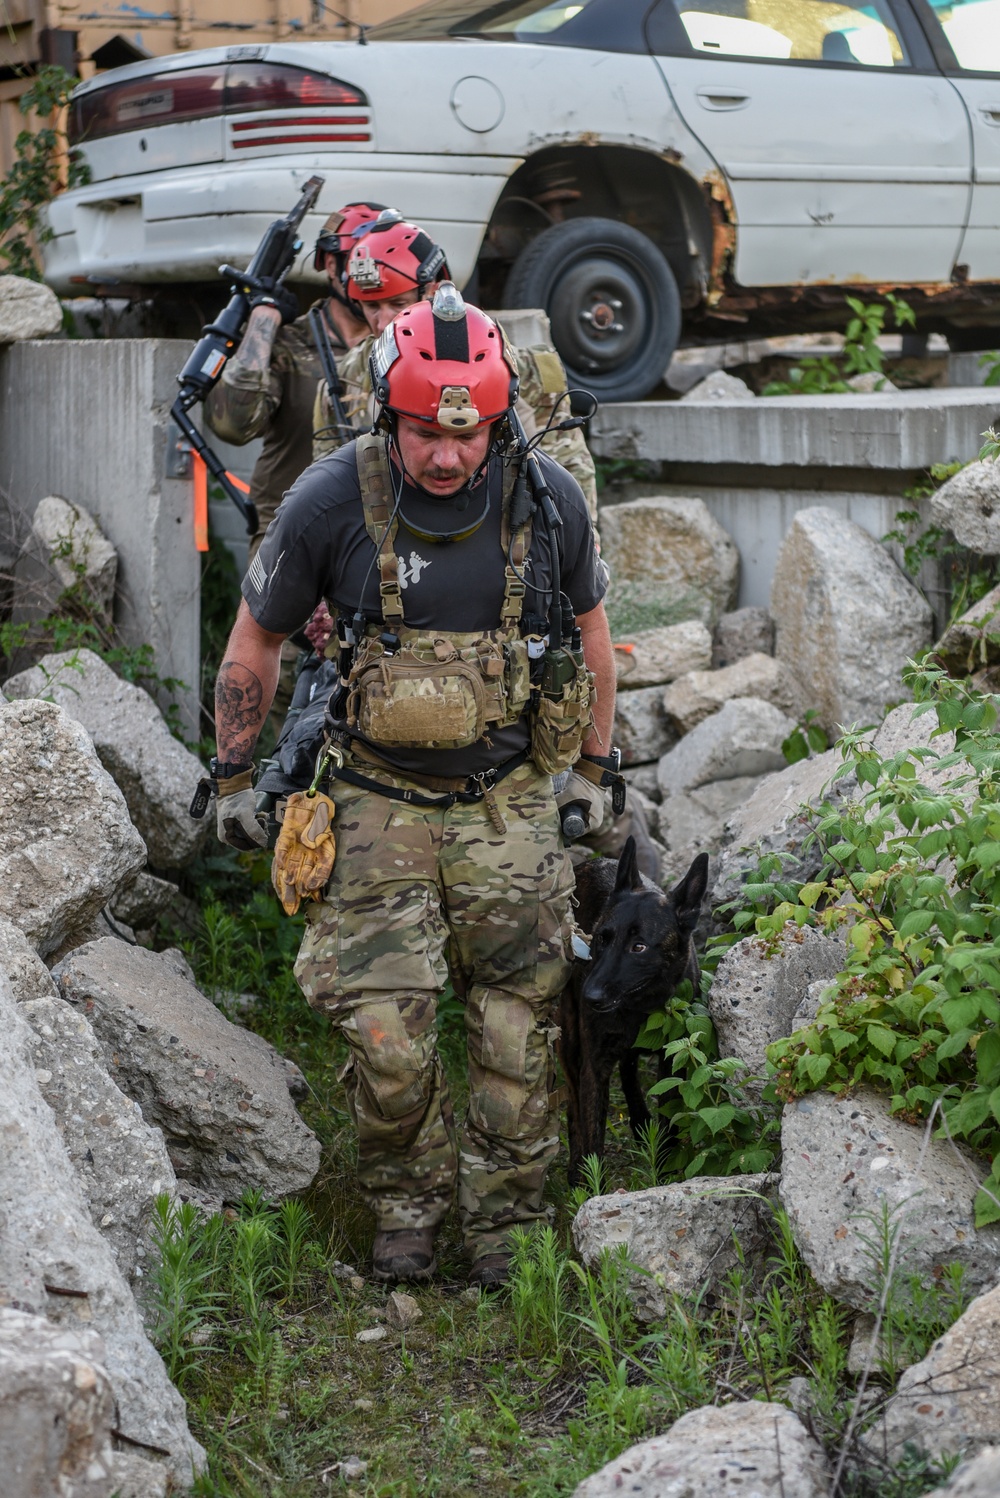 Kentucky Air Guard is home to only search and rescue dog in DOD